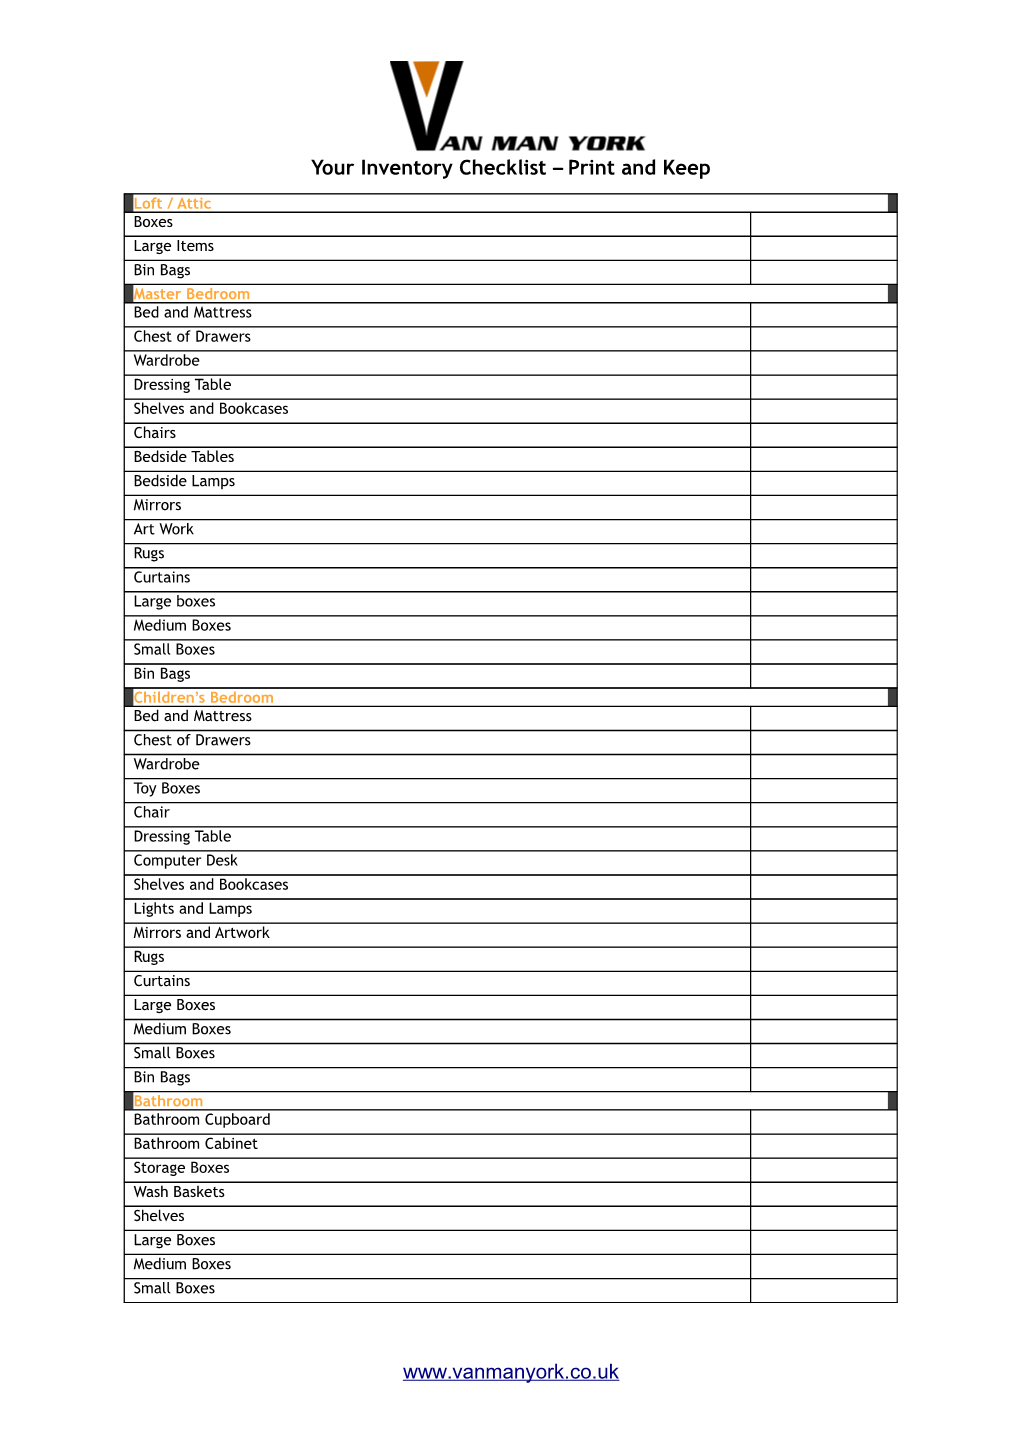 Your Inventory Checklist Print and Keep